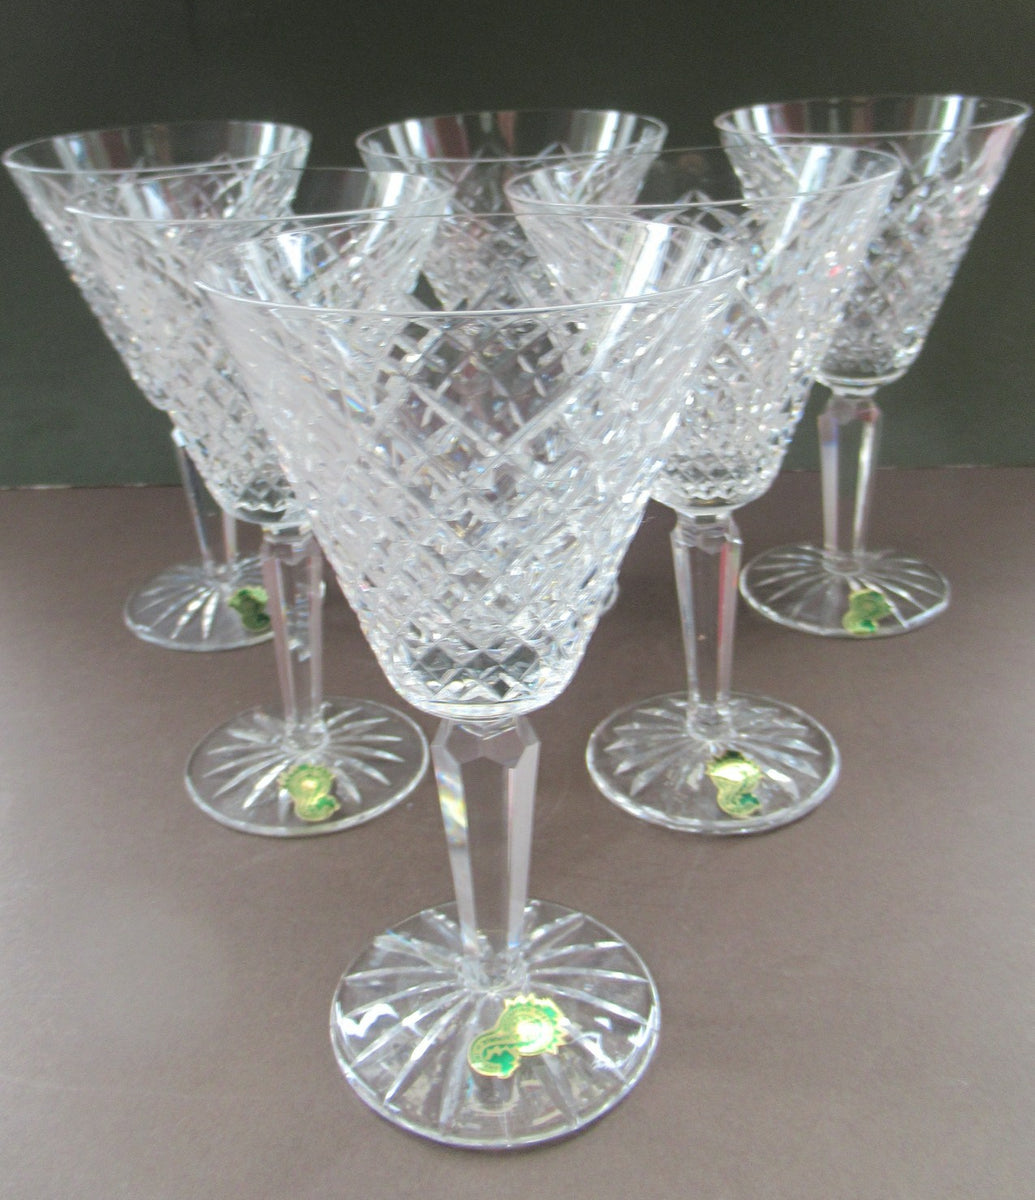 SINGLE Waterford Crystal Water Goblet or Large Wine Glass 